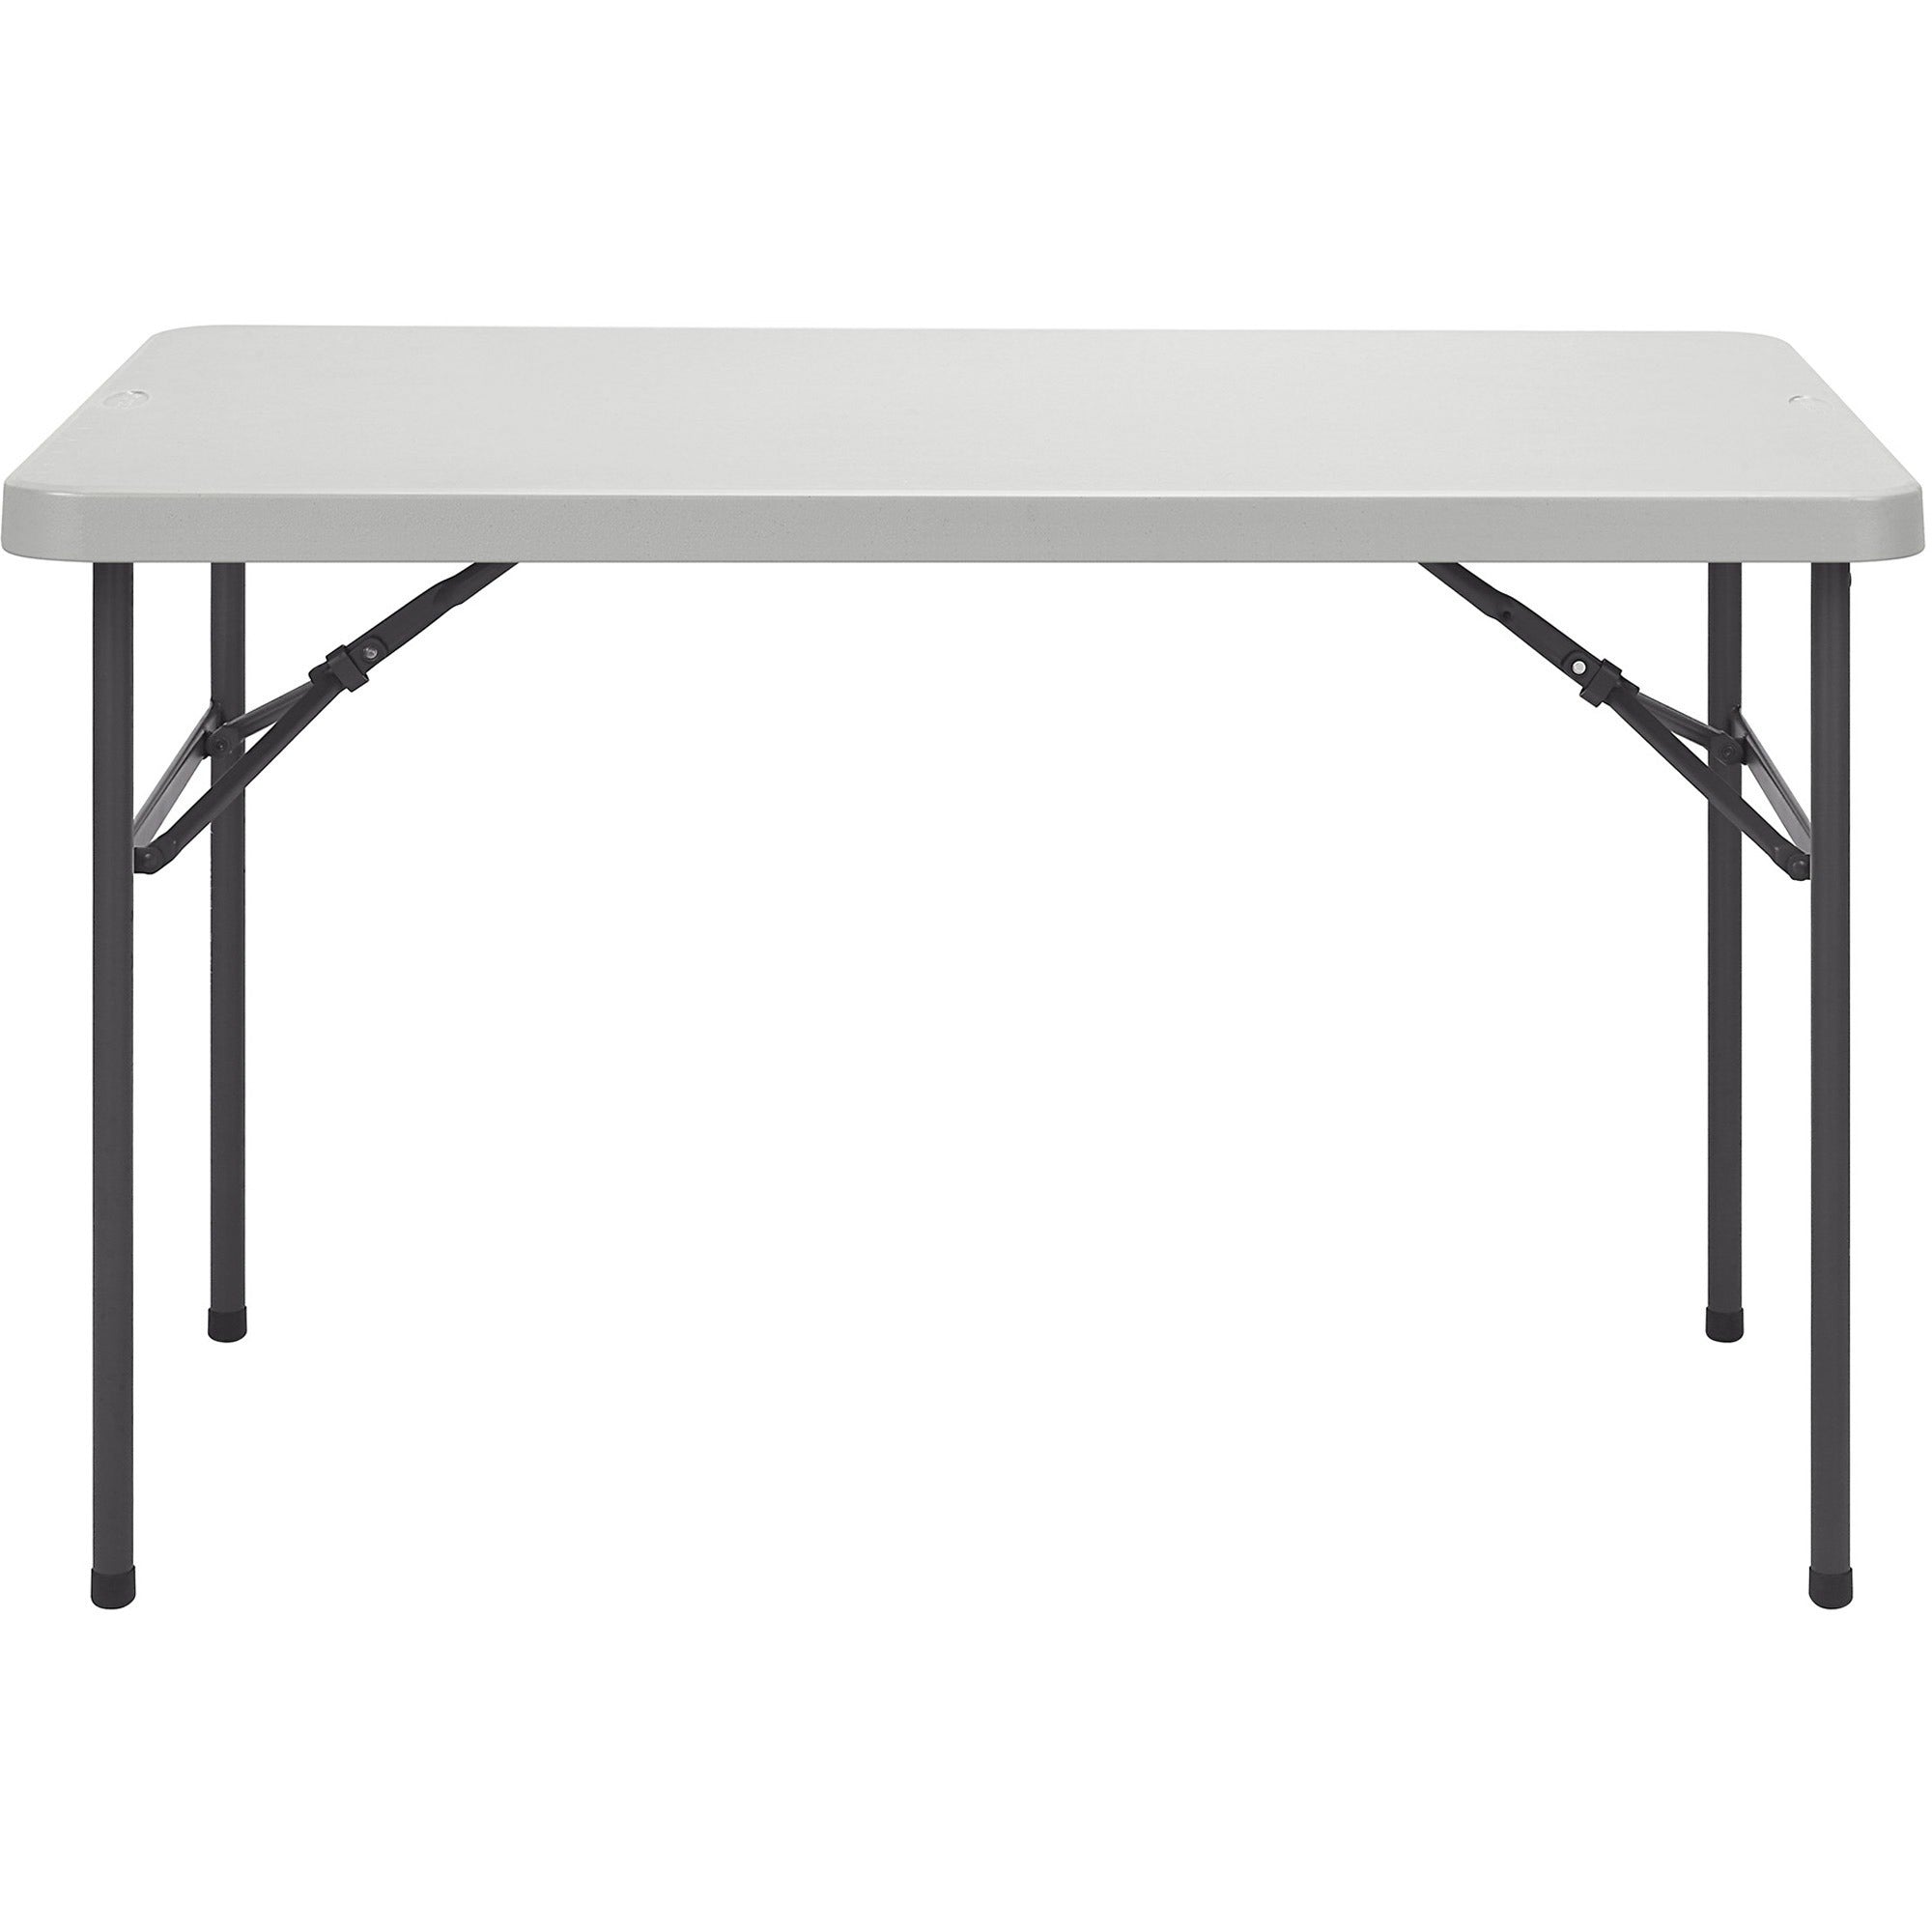 lorell-ultra-lite-banquet-table-for-table-toplight-gray-rectangle-top-dark-gray-base-450-lb-capacity-x-48-table-top-width-x-30-table-top-depth-x-2-table-top-thickness-29-height-gray-1-each_llr66657 - 3